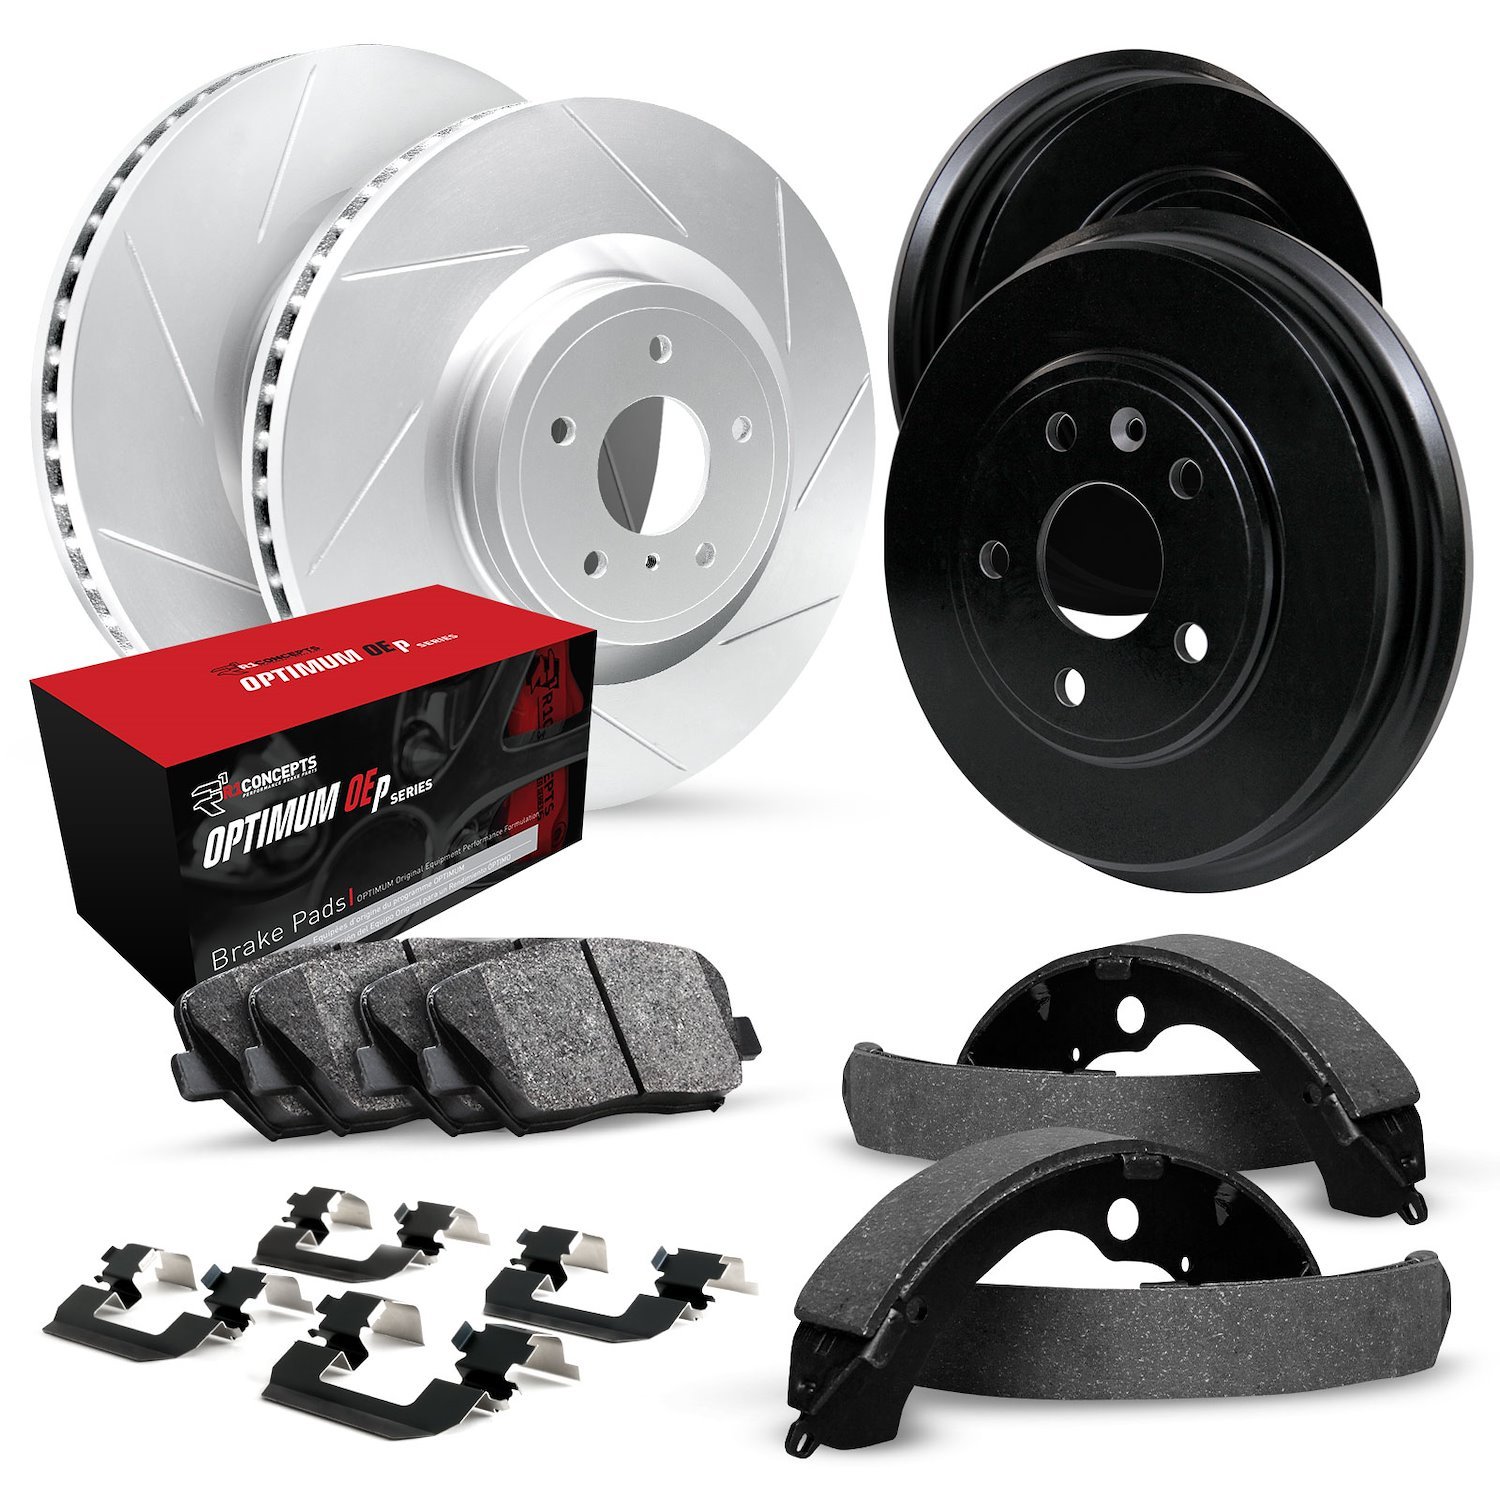 GEO-Carbon Slotted Brake Rotor & Drum Set w/Optimum OE Pads, Shoes, & Hardware, 1990-2000 GM, Position: Front & Rear